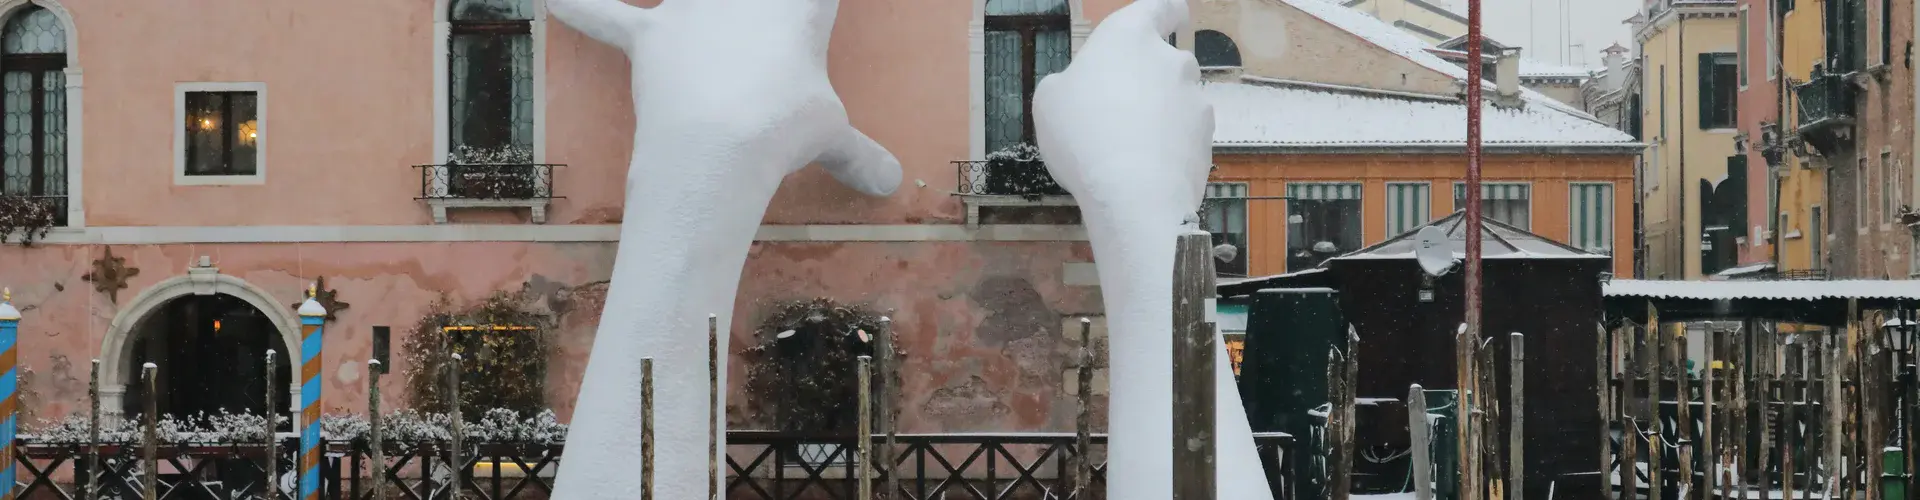 Giant Hands, called Support, in a rare snowy event in a floating city of Venice.jpg (Credit: Hung Vuong Pham)